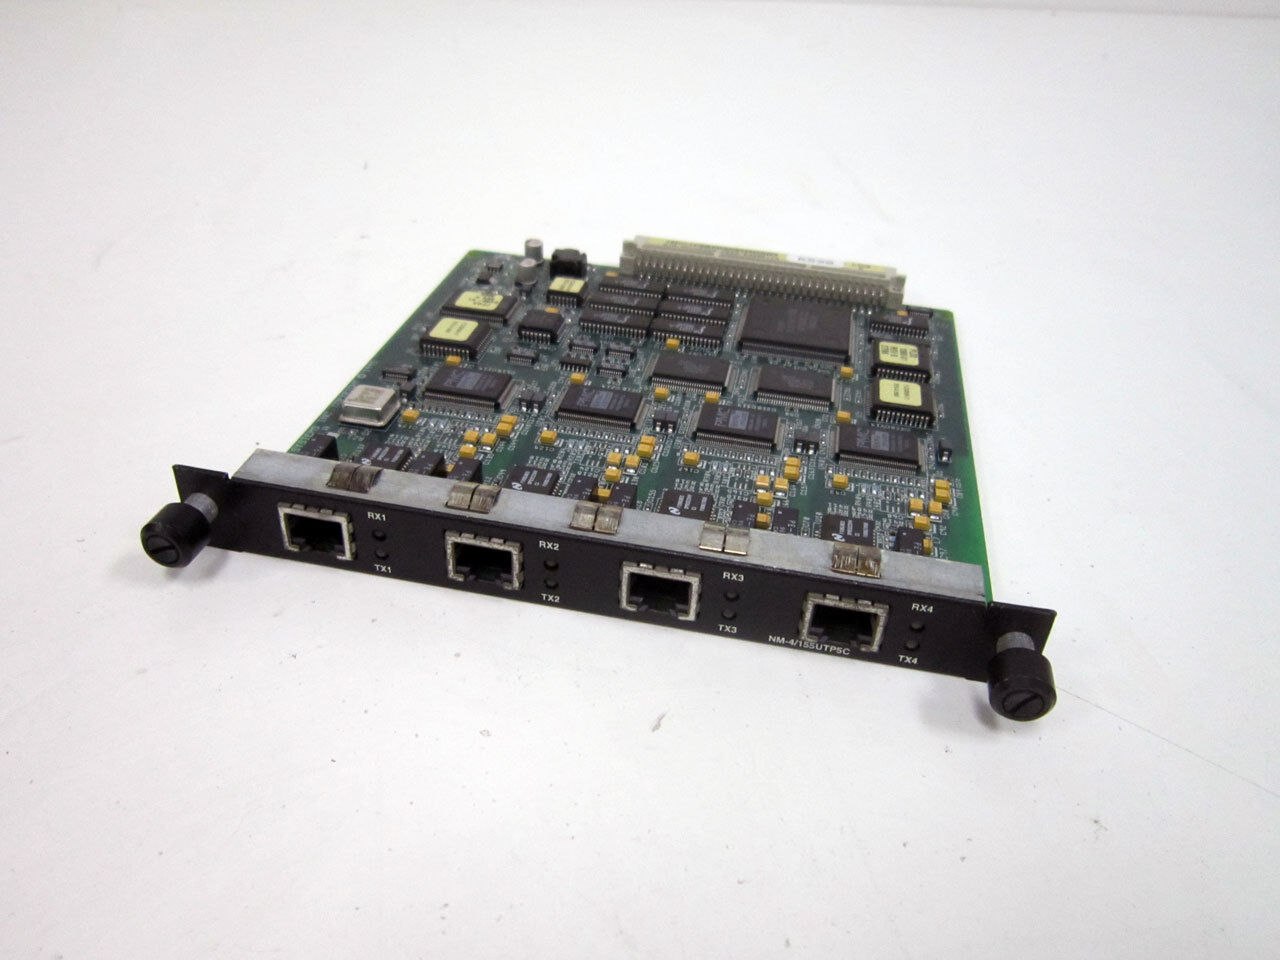 MARCONI FORE NM-4/155UTP5C NETWORK MODULE 4-PORT 155 MBPS STS-3C STM-1 MODULE